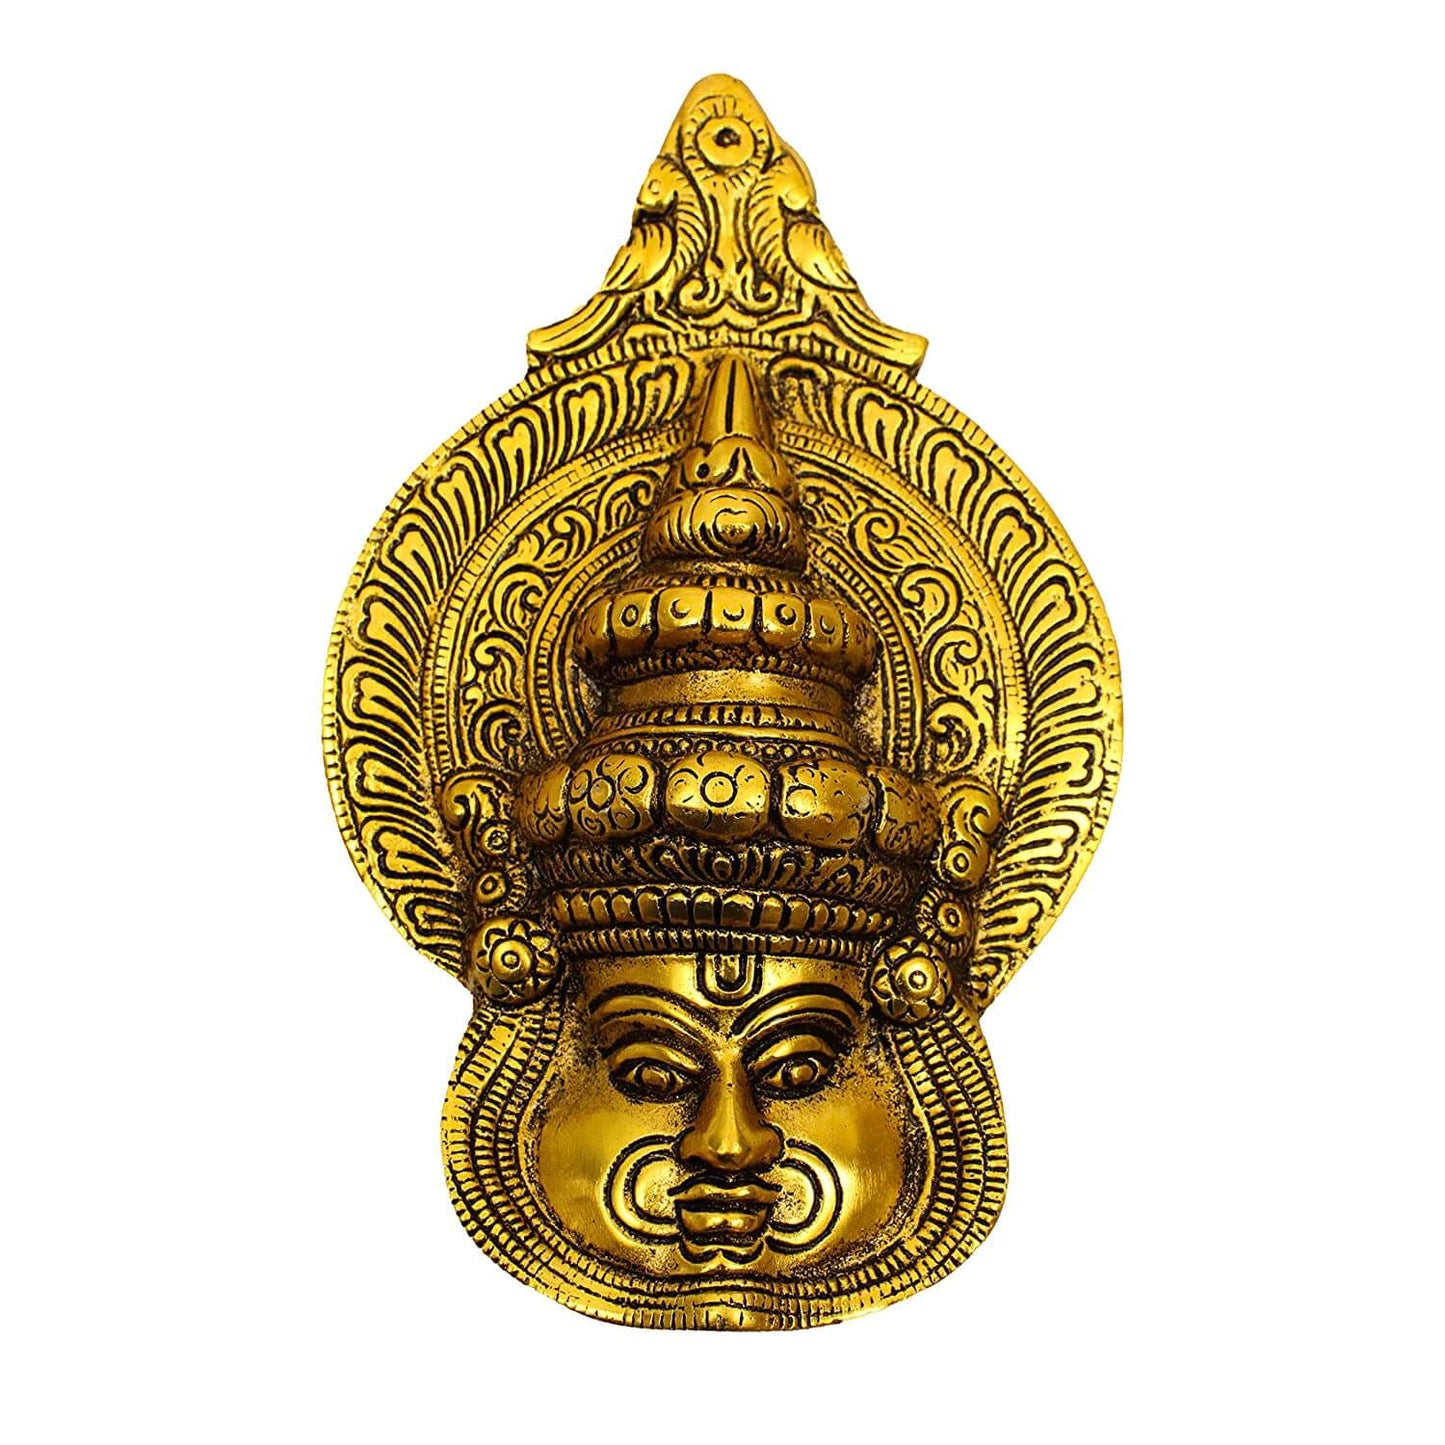 Brass Kadhakali Face Oxidized Gold Finished God Idol Statue Showpiece for Home Office, Pooja, Gifting, Home Decor (6.2 x 3.9 Inch) Mangal Fashions | Indian Home Decor and Craft